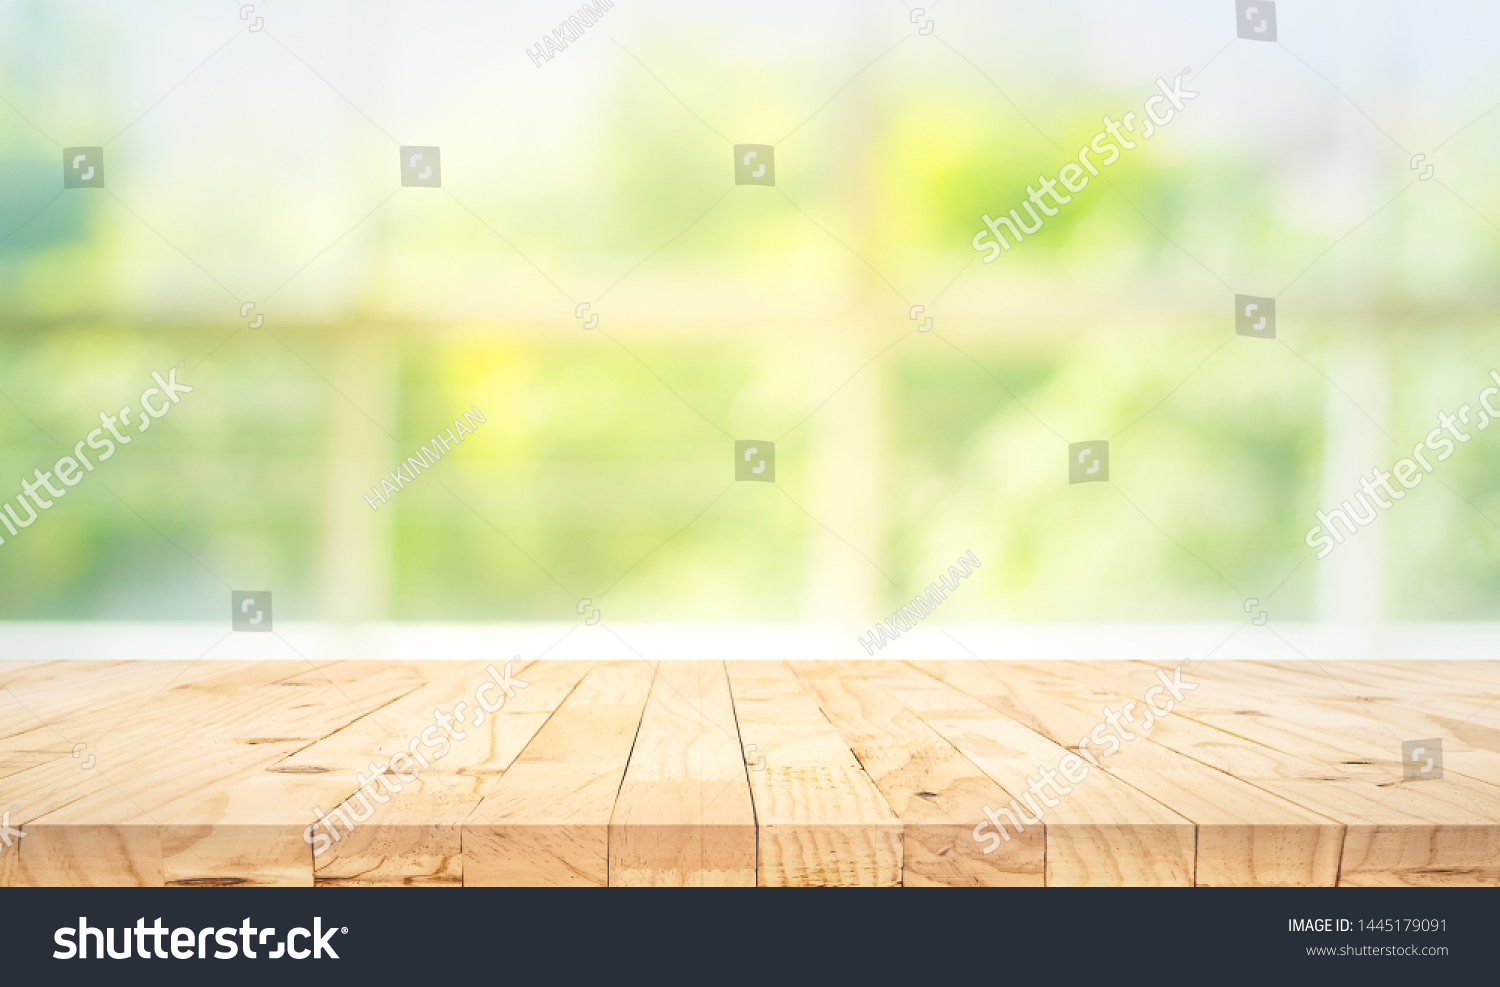 Empty wood table top on blur abstract green garden from window view in the morning. For montage product display or design key visual layout #1445179091